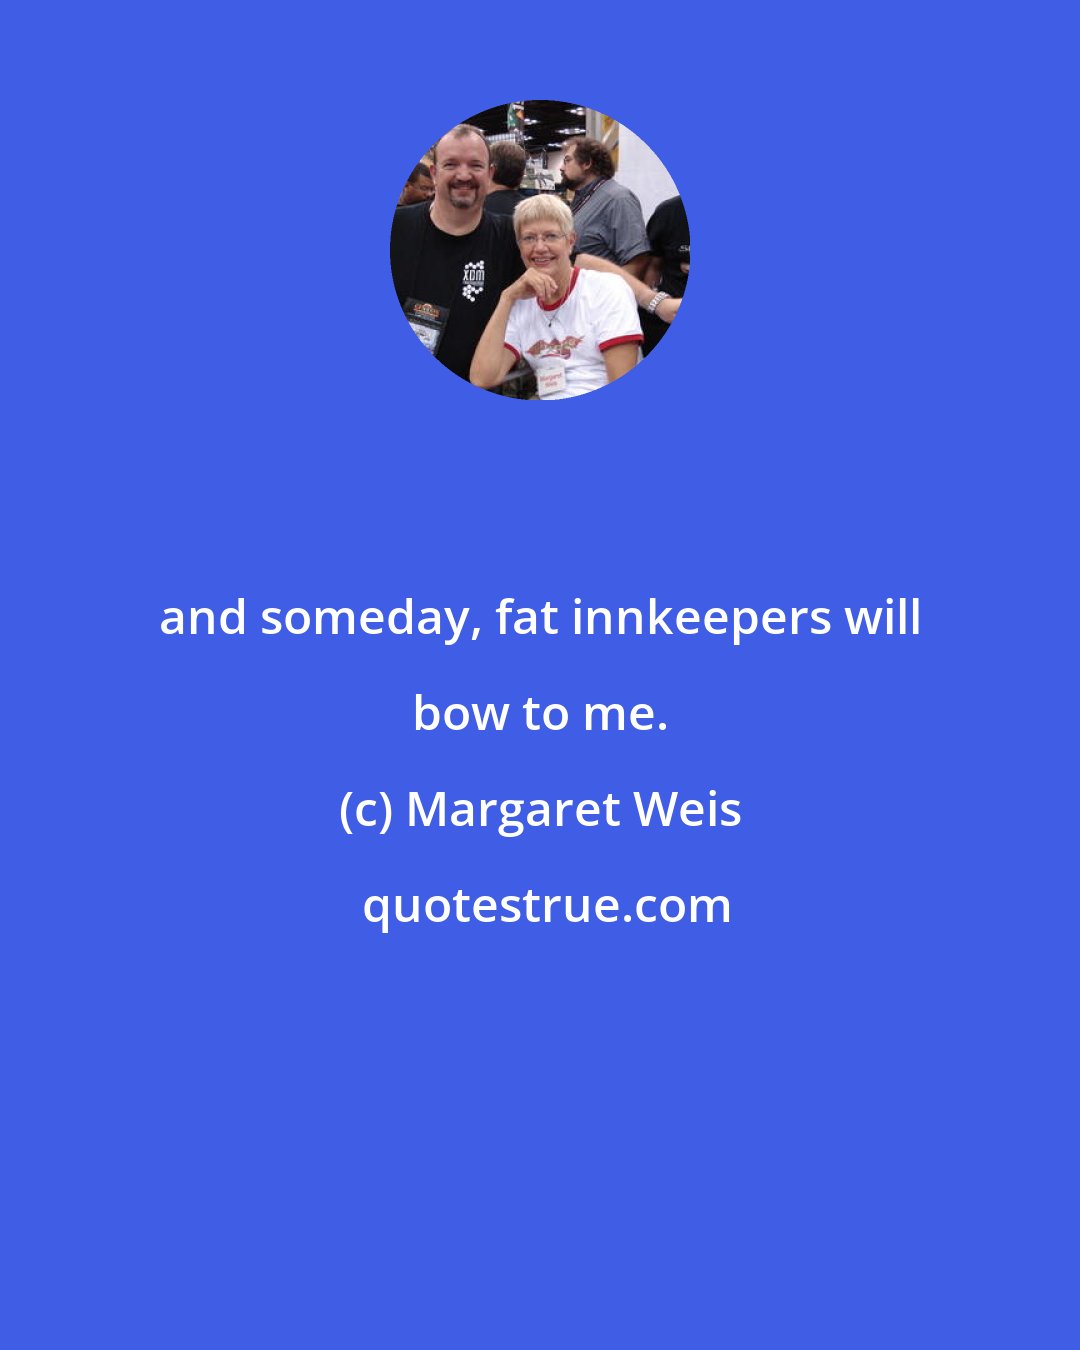 Margaret Weis: and someday, fat innkeepers will bow to me.